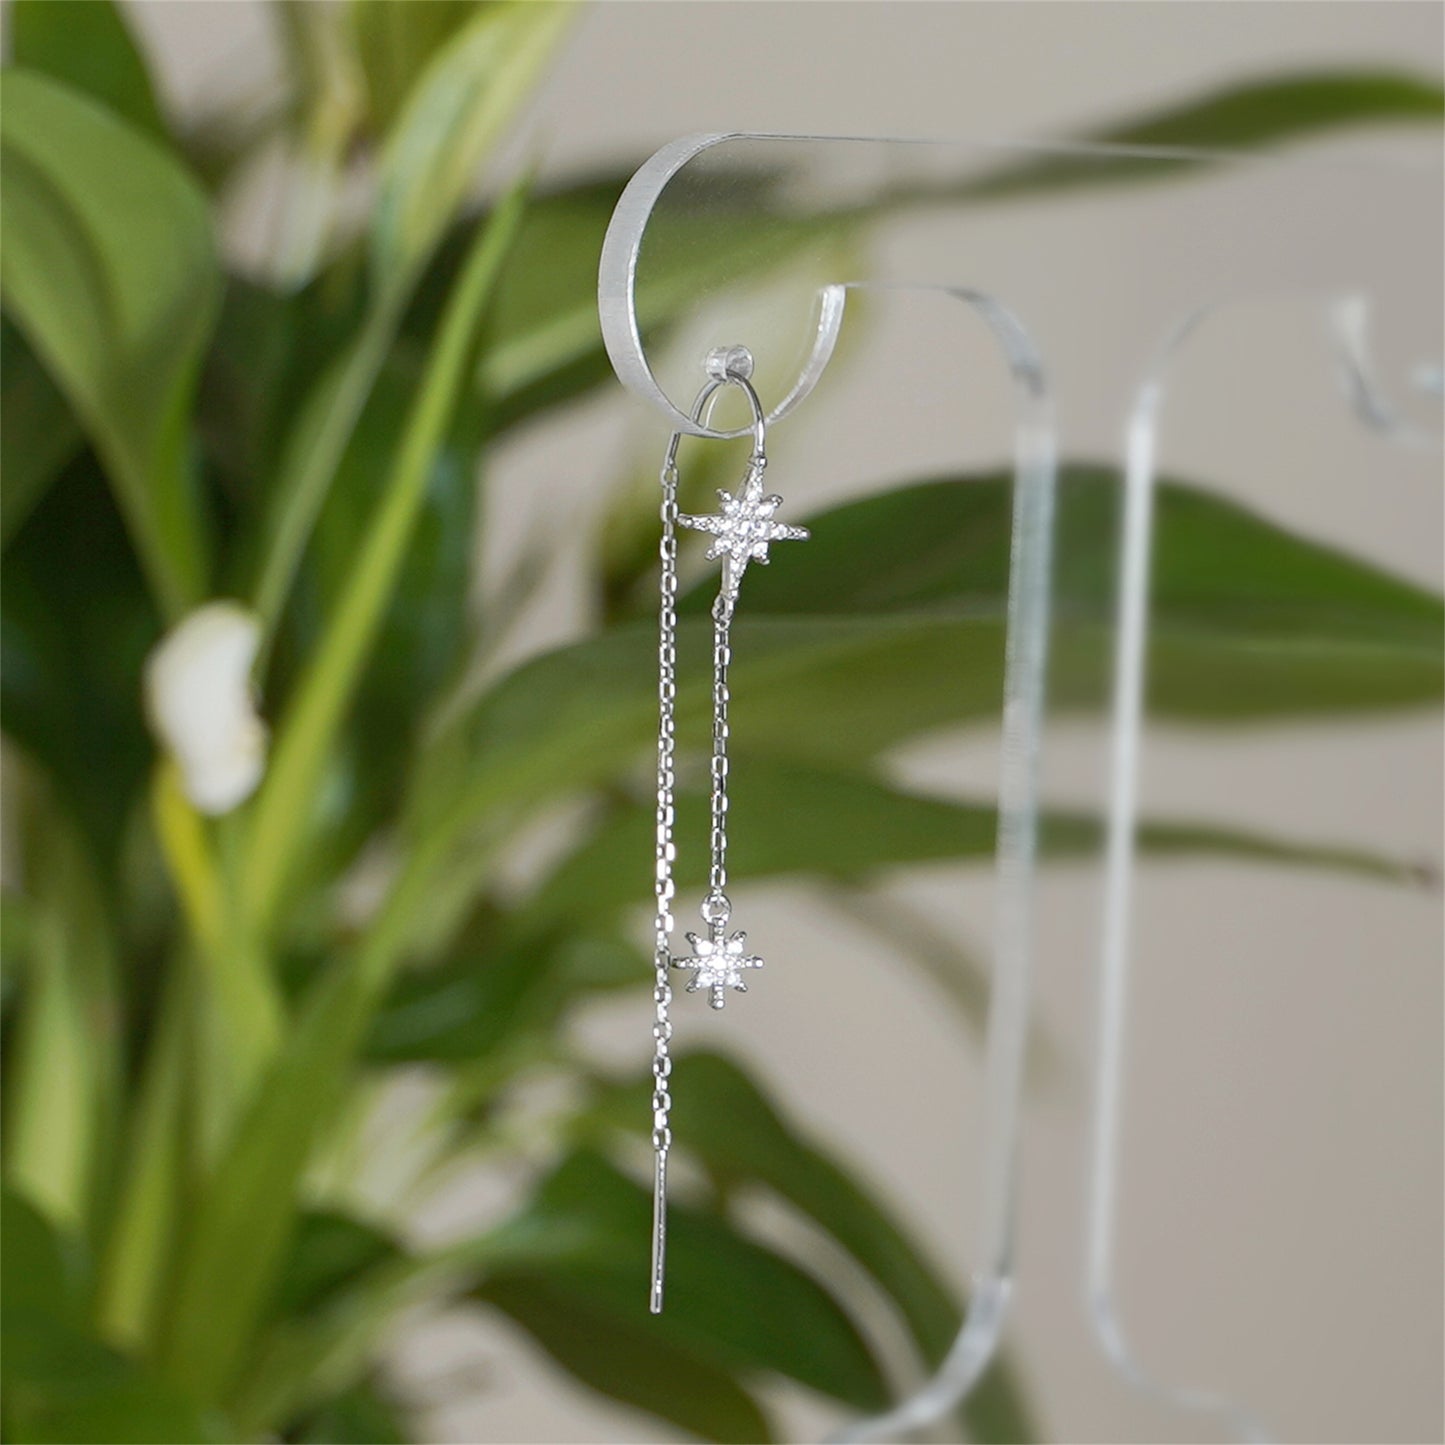 925 Sterling Silver Threader Earrings with Paved CZ Pole Star Chain Drop - sugarkittenlondon